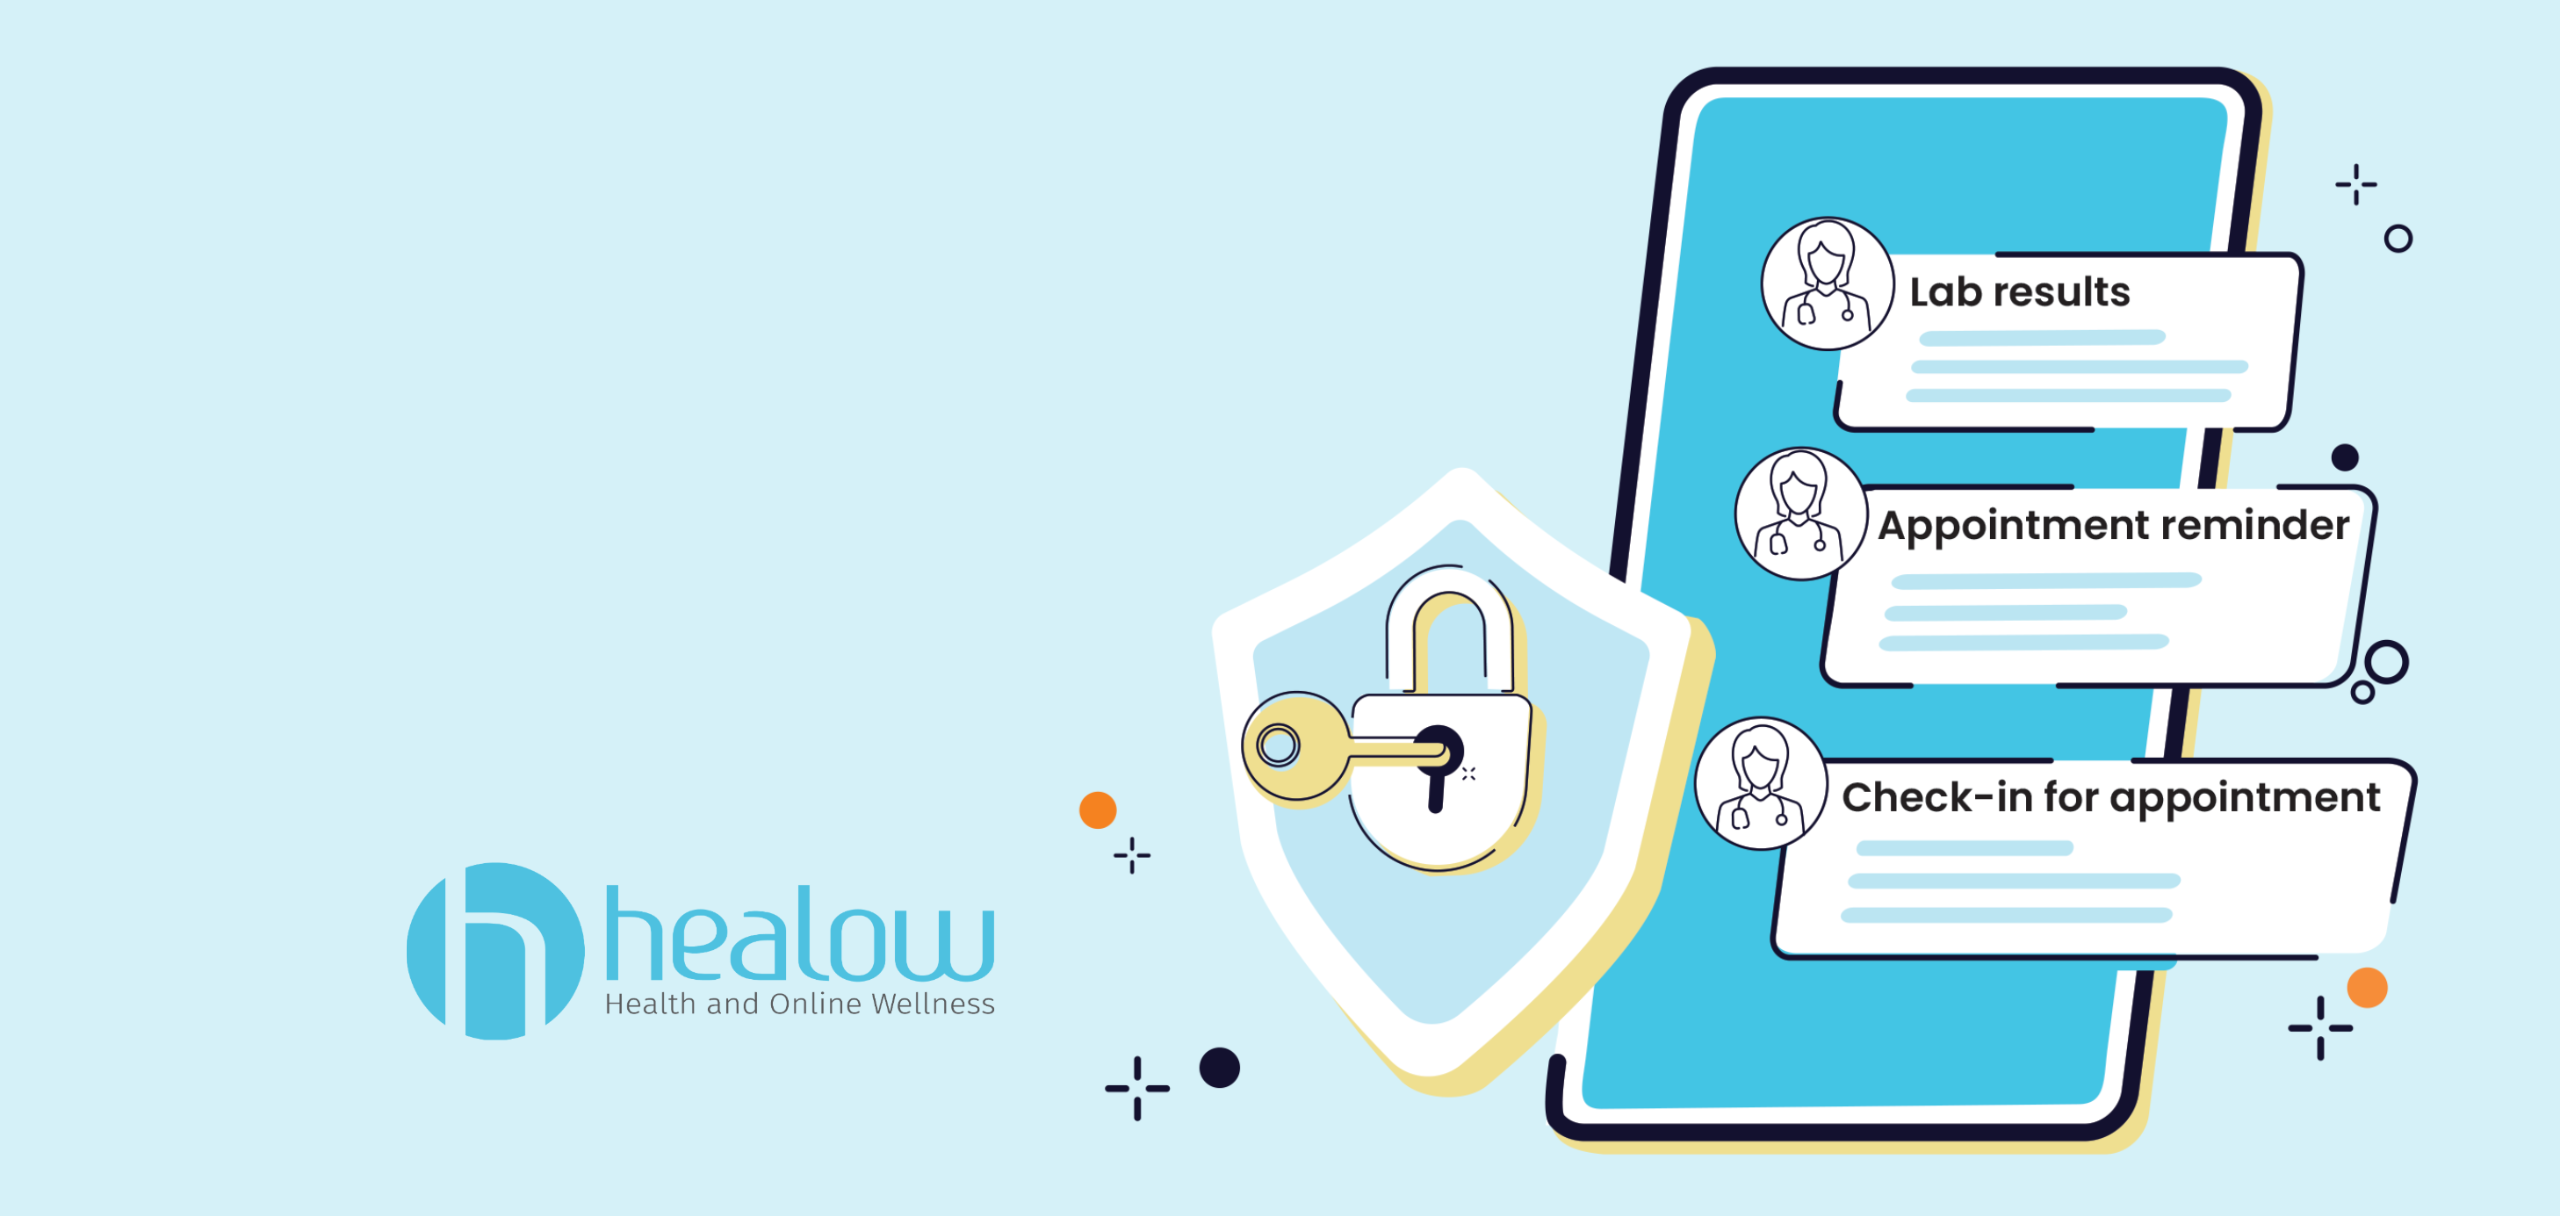 healow logo with healow secure text graphic on the right side